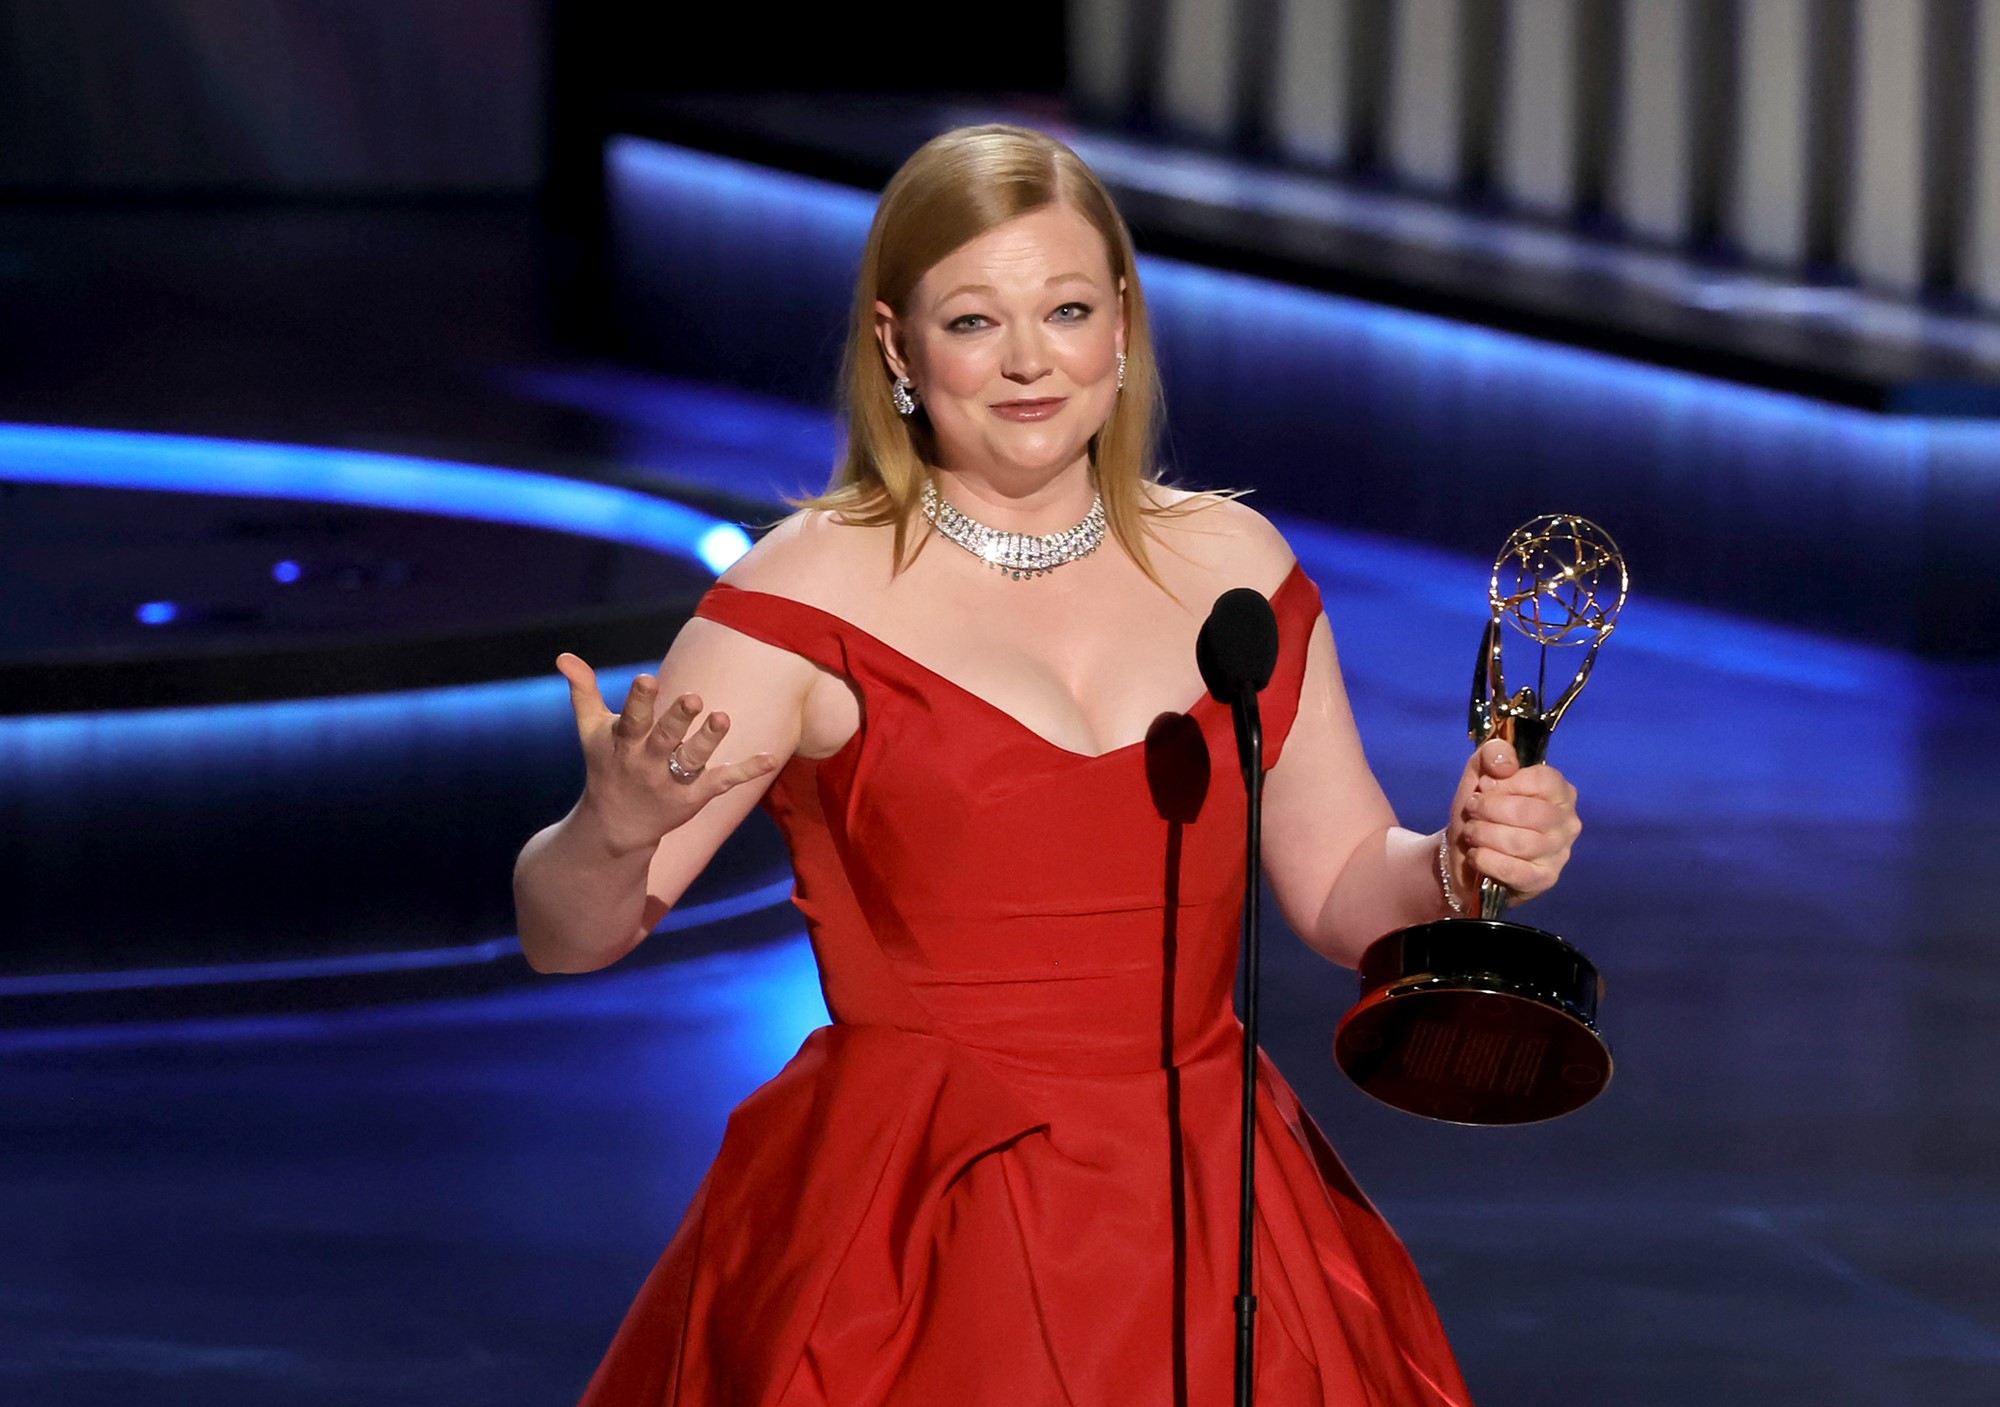 Sarah Snook with her arms out in a red dress.